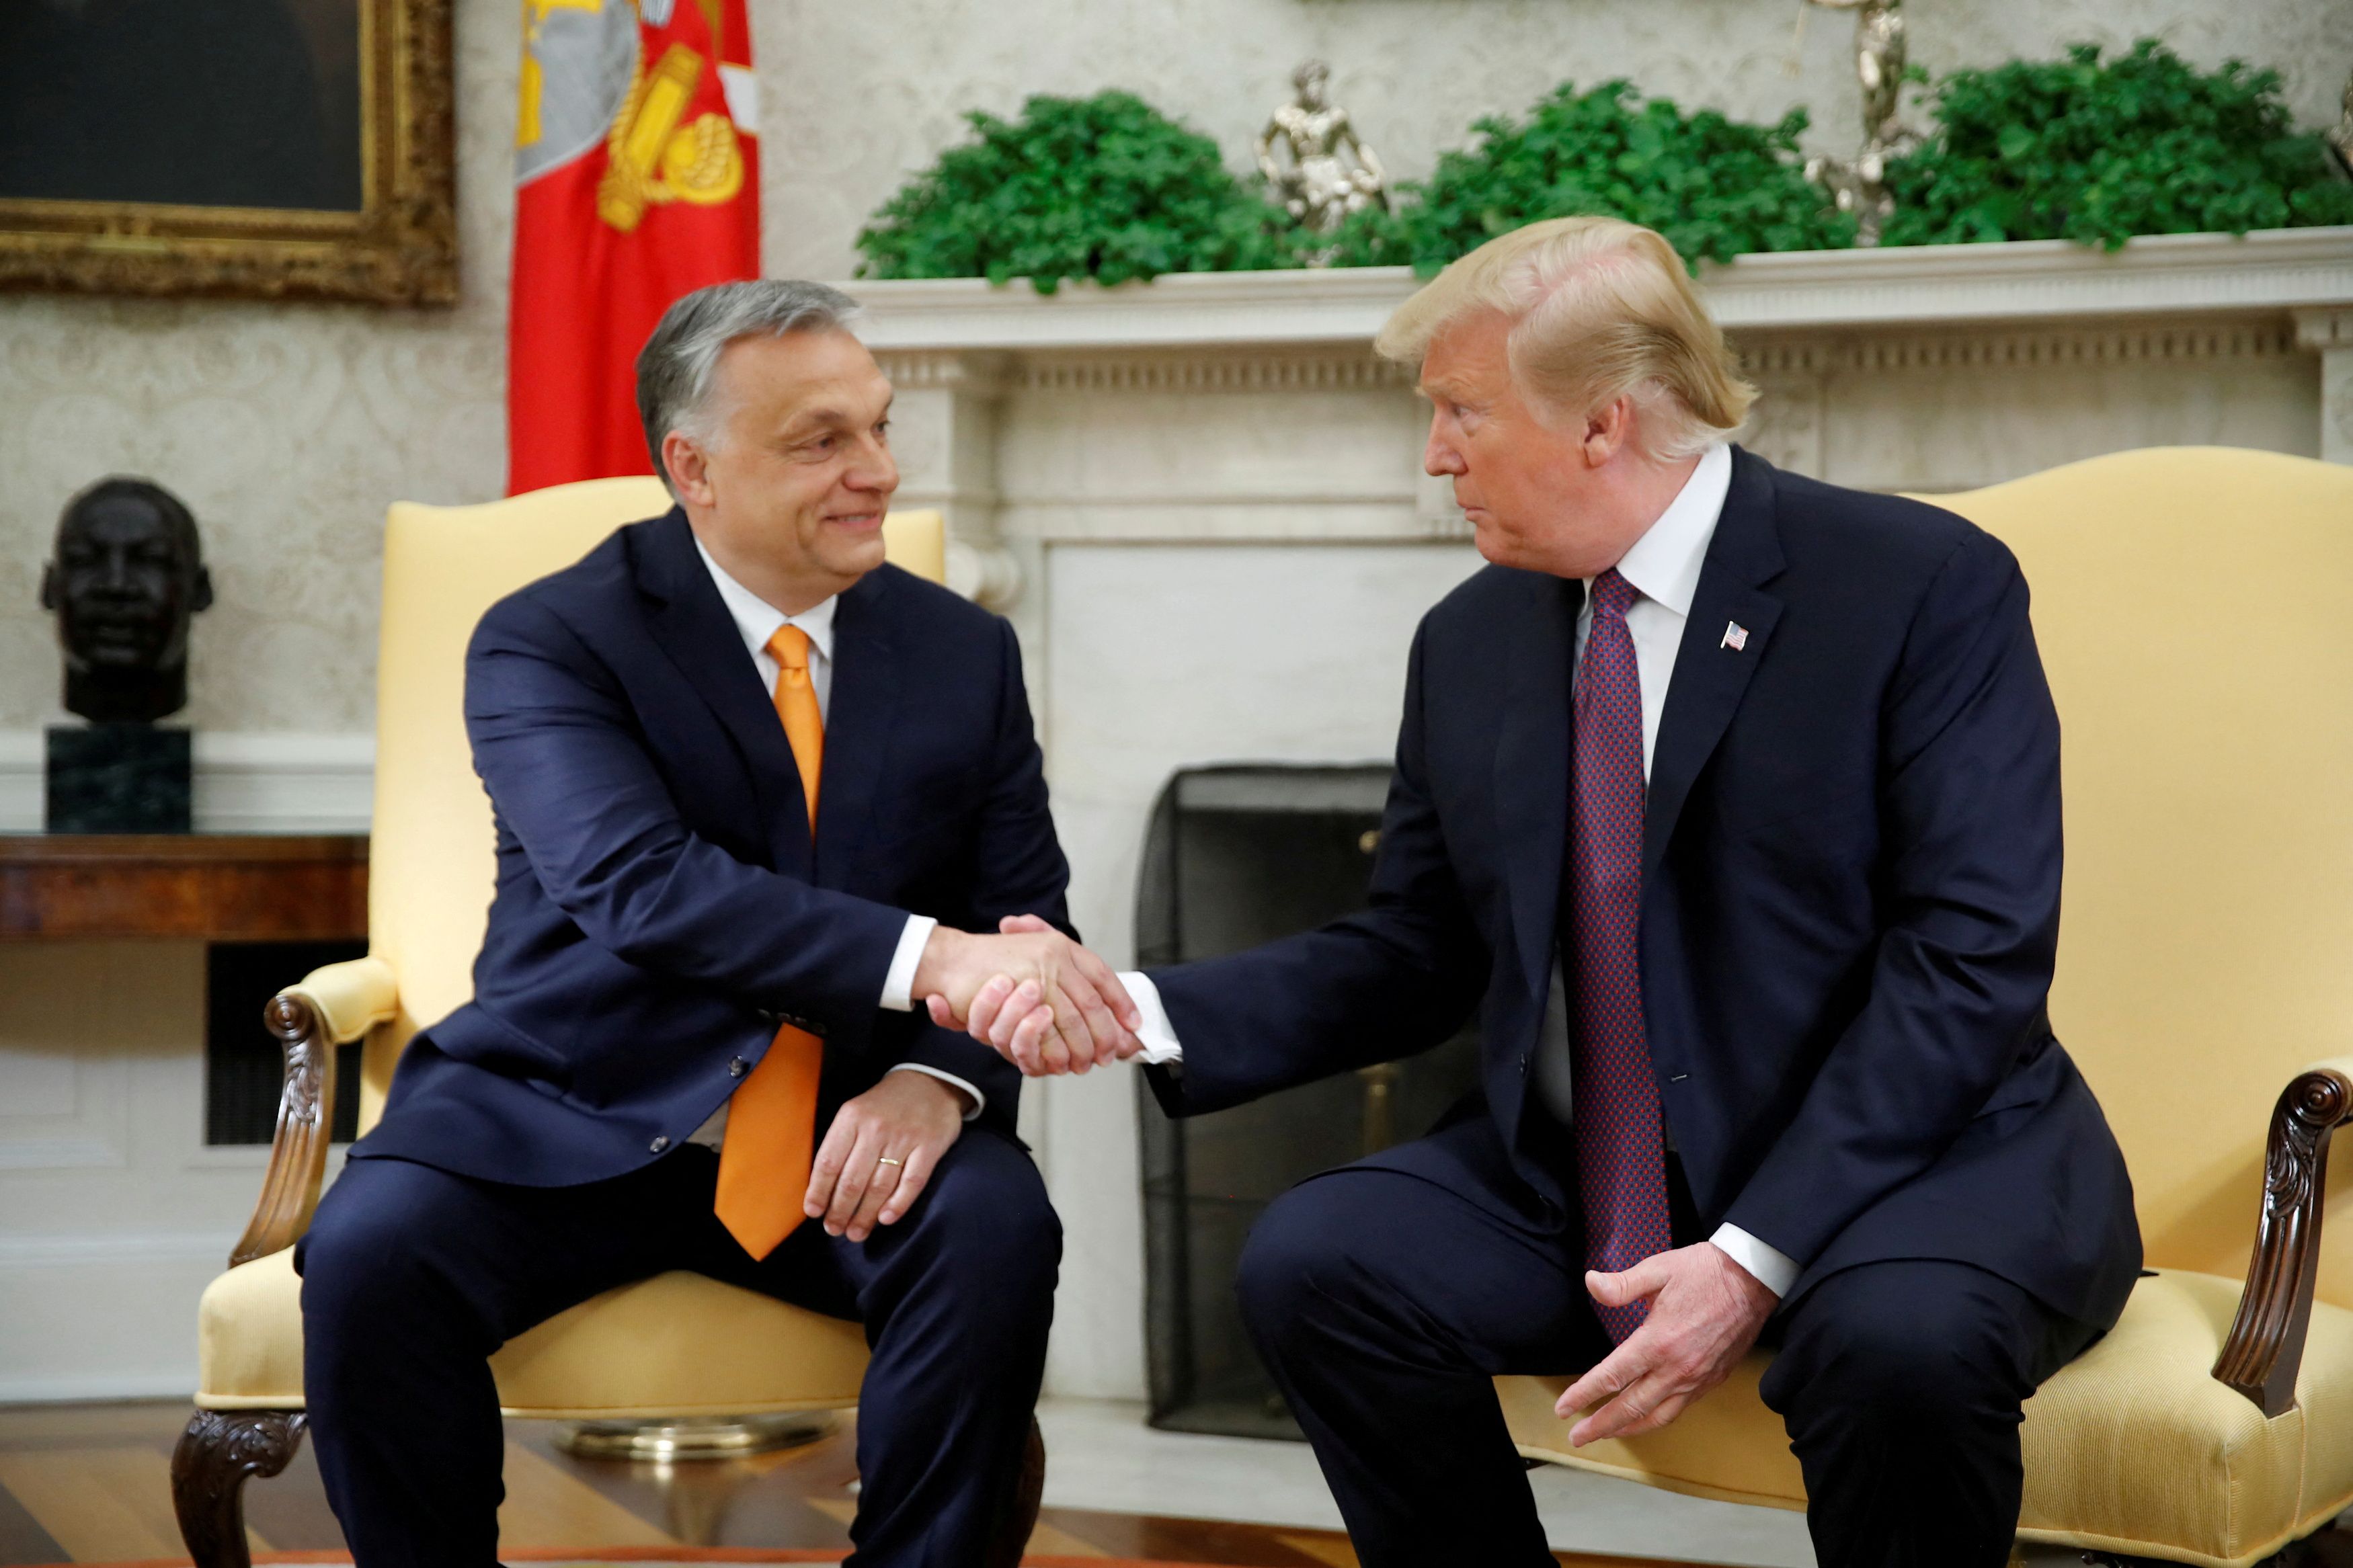 U.S. President Trump meets with Hungary's Prime Minister Orban at the White House in Washington